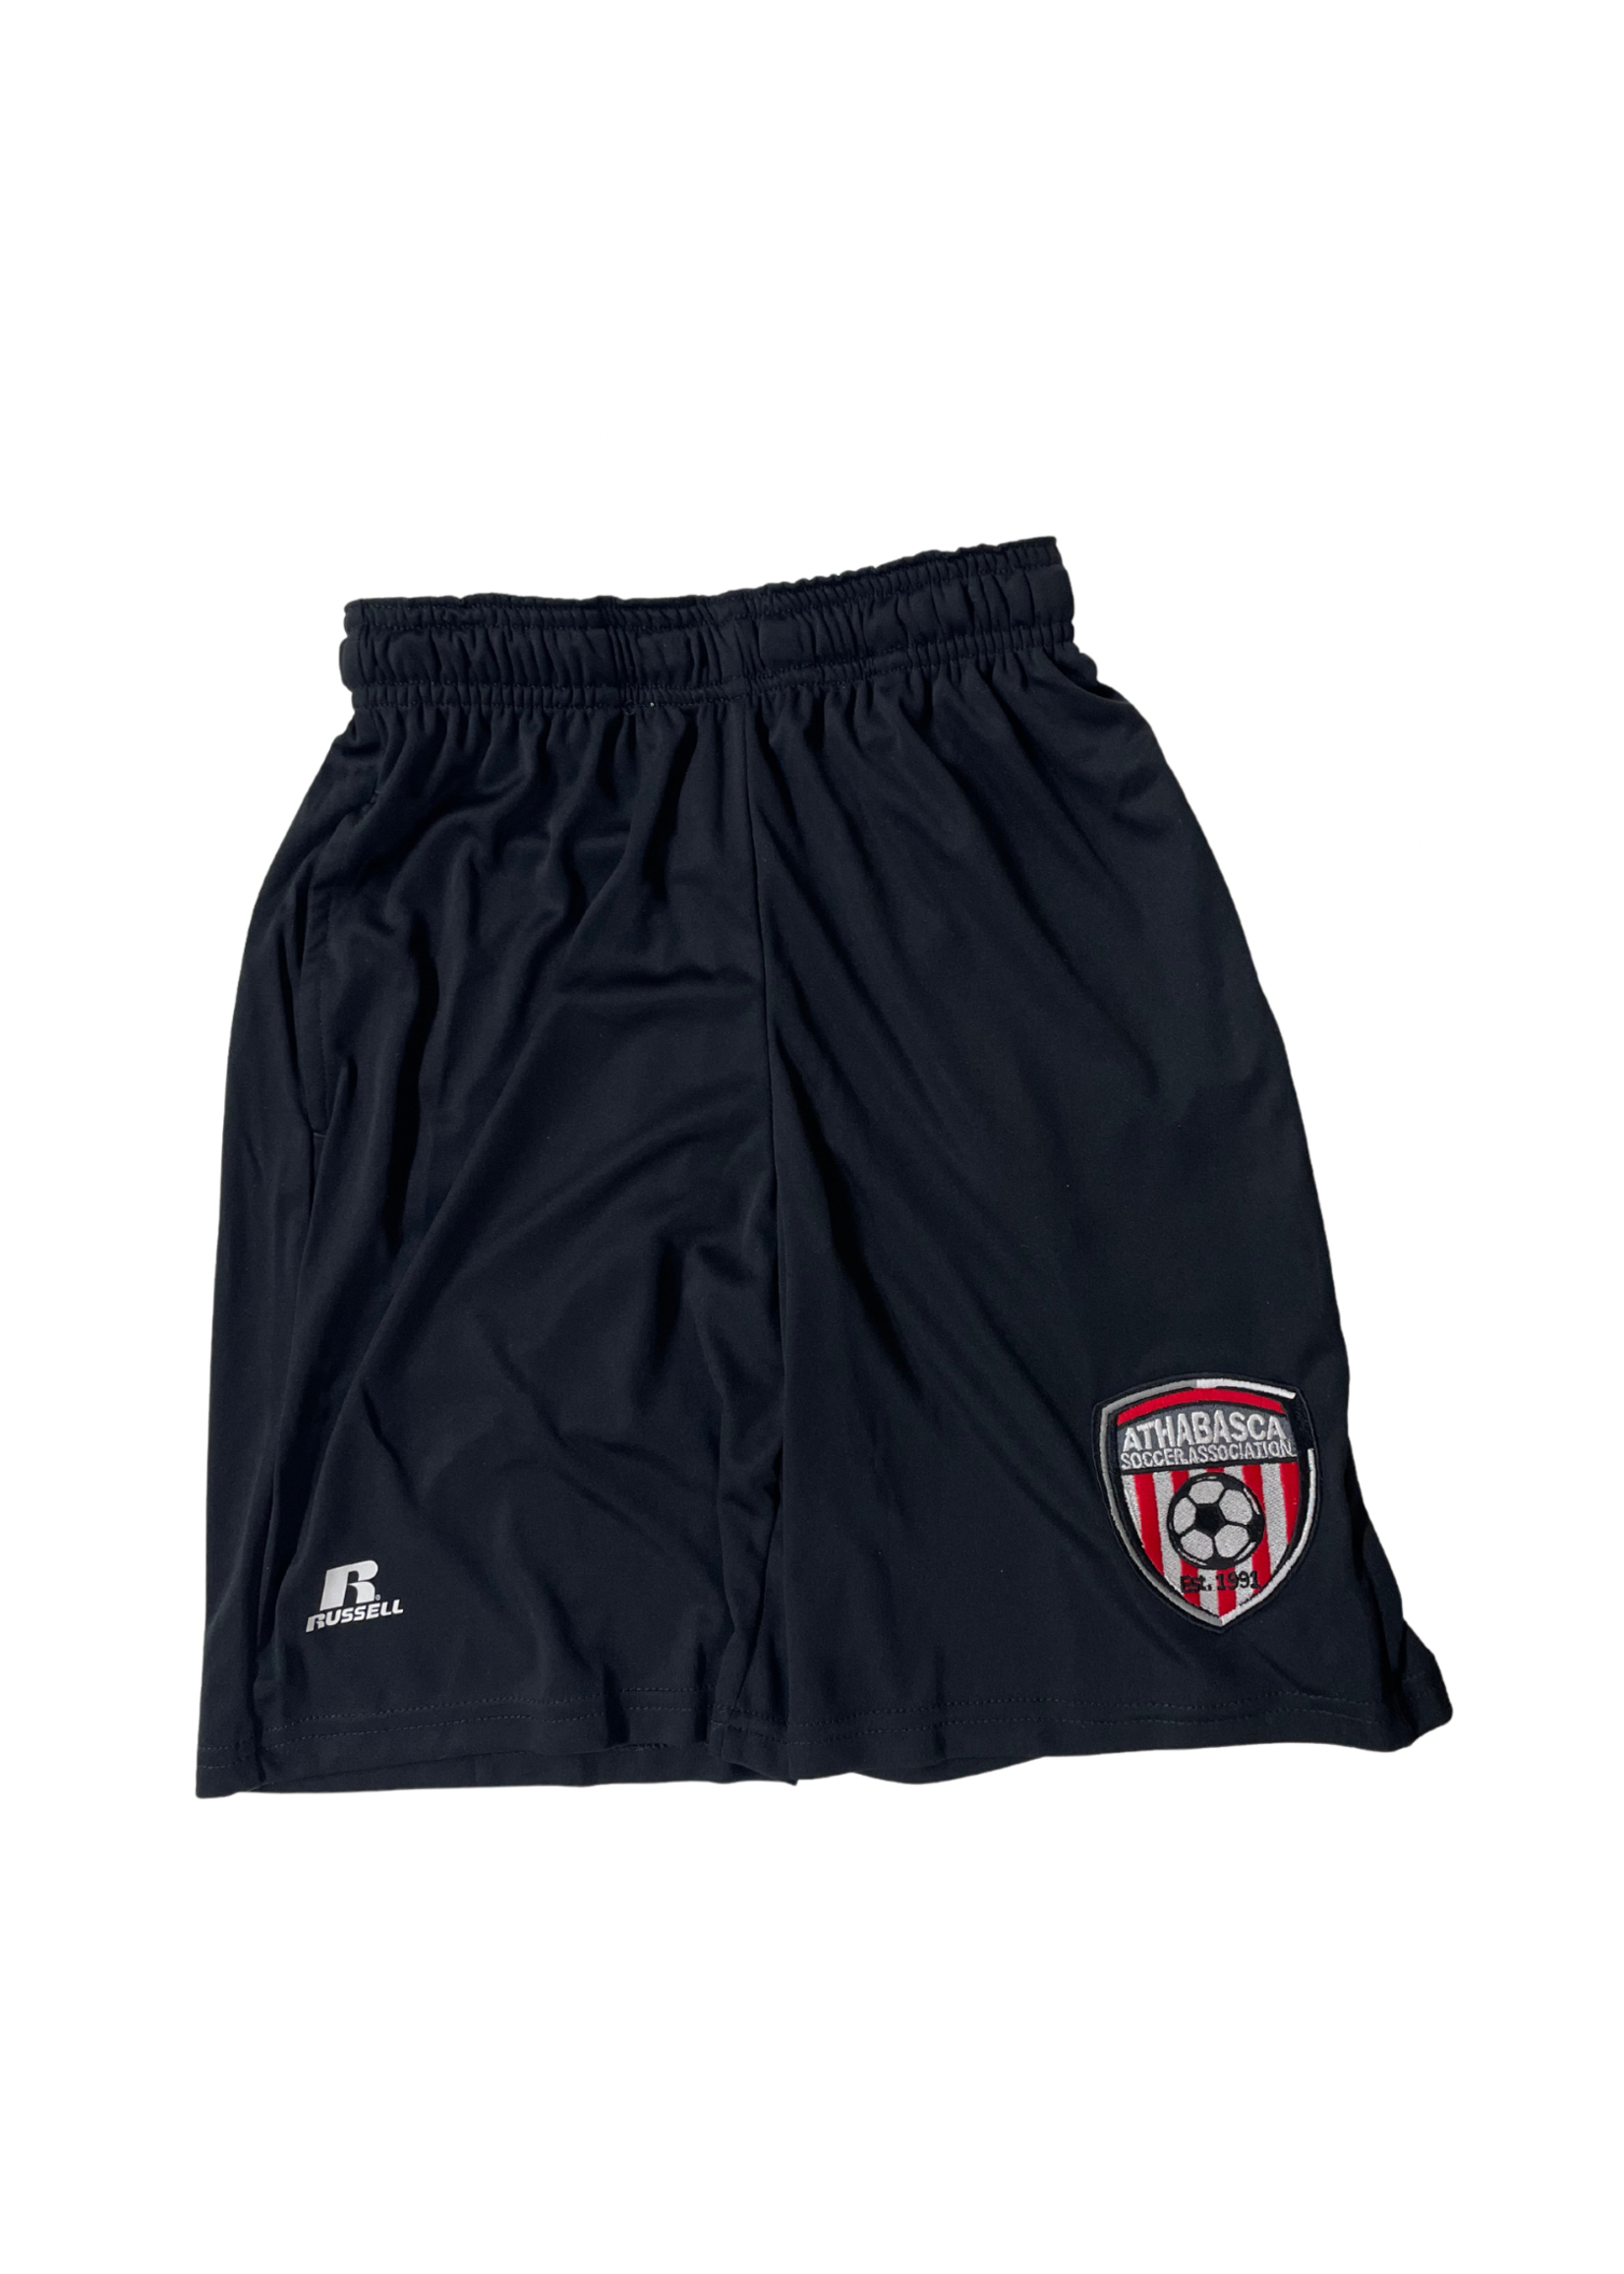 RUSSELL ATHABASCA SOCCER RUSSELL LOGO SHORT